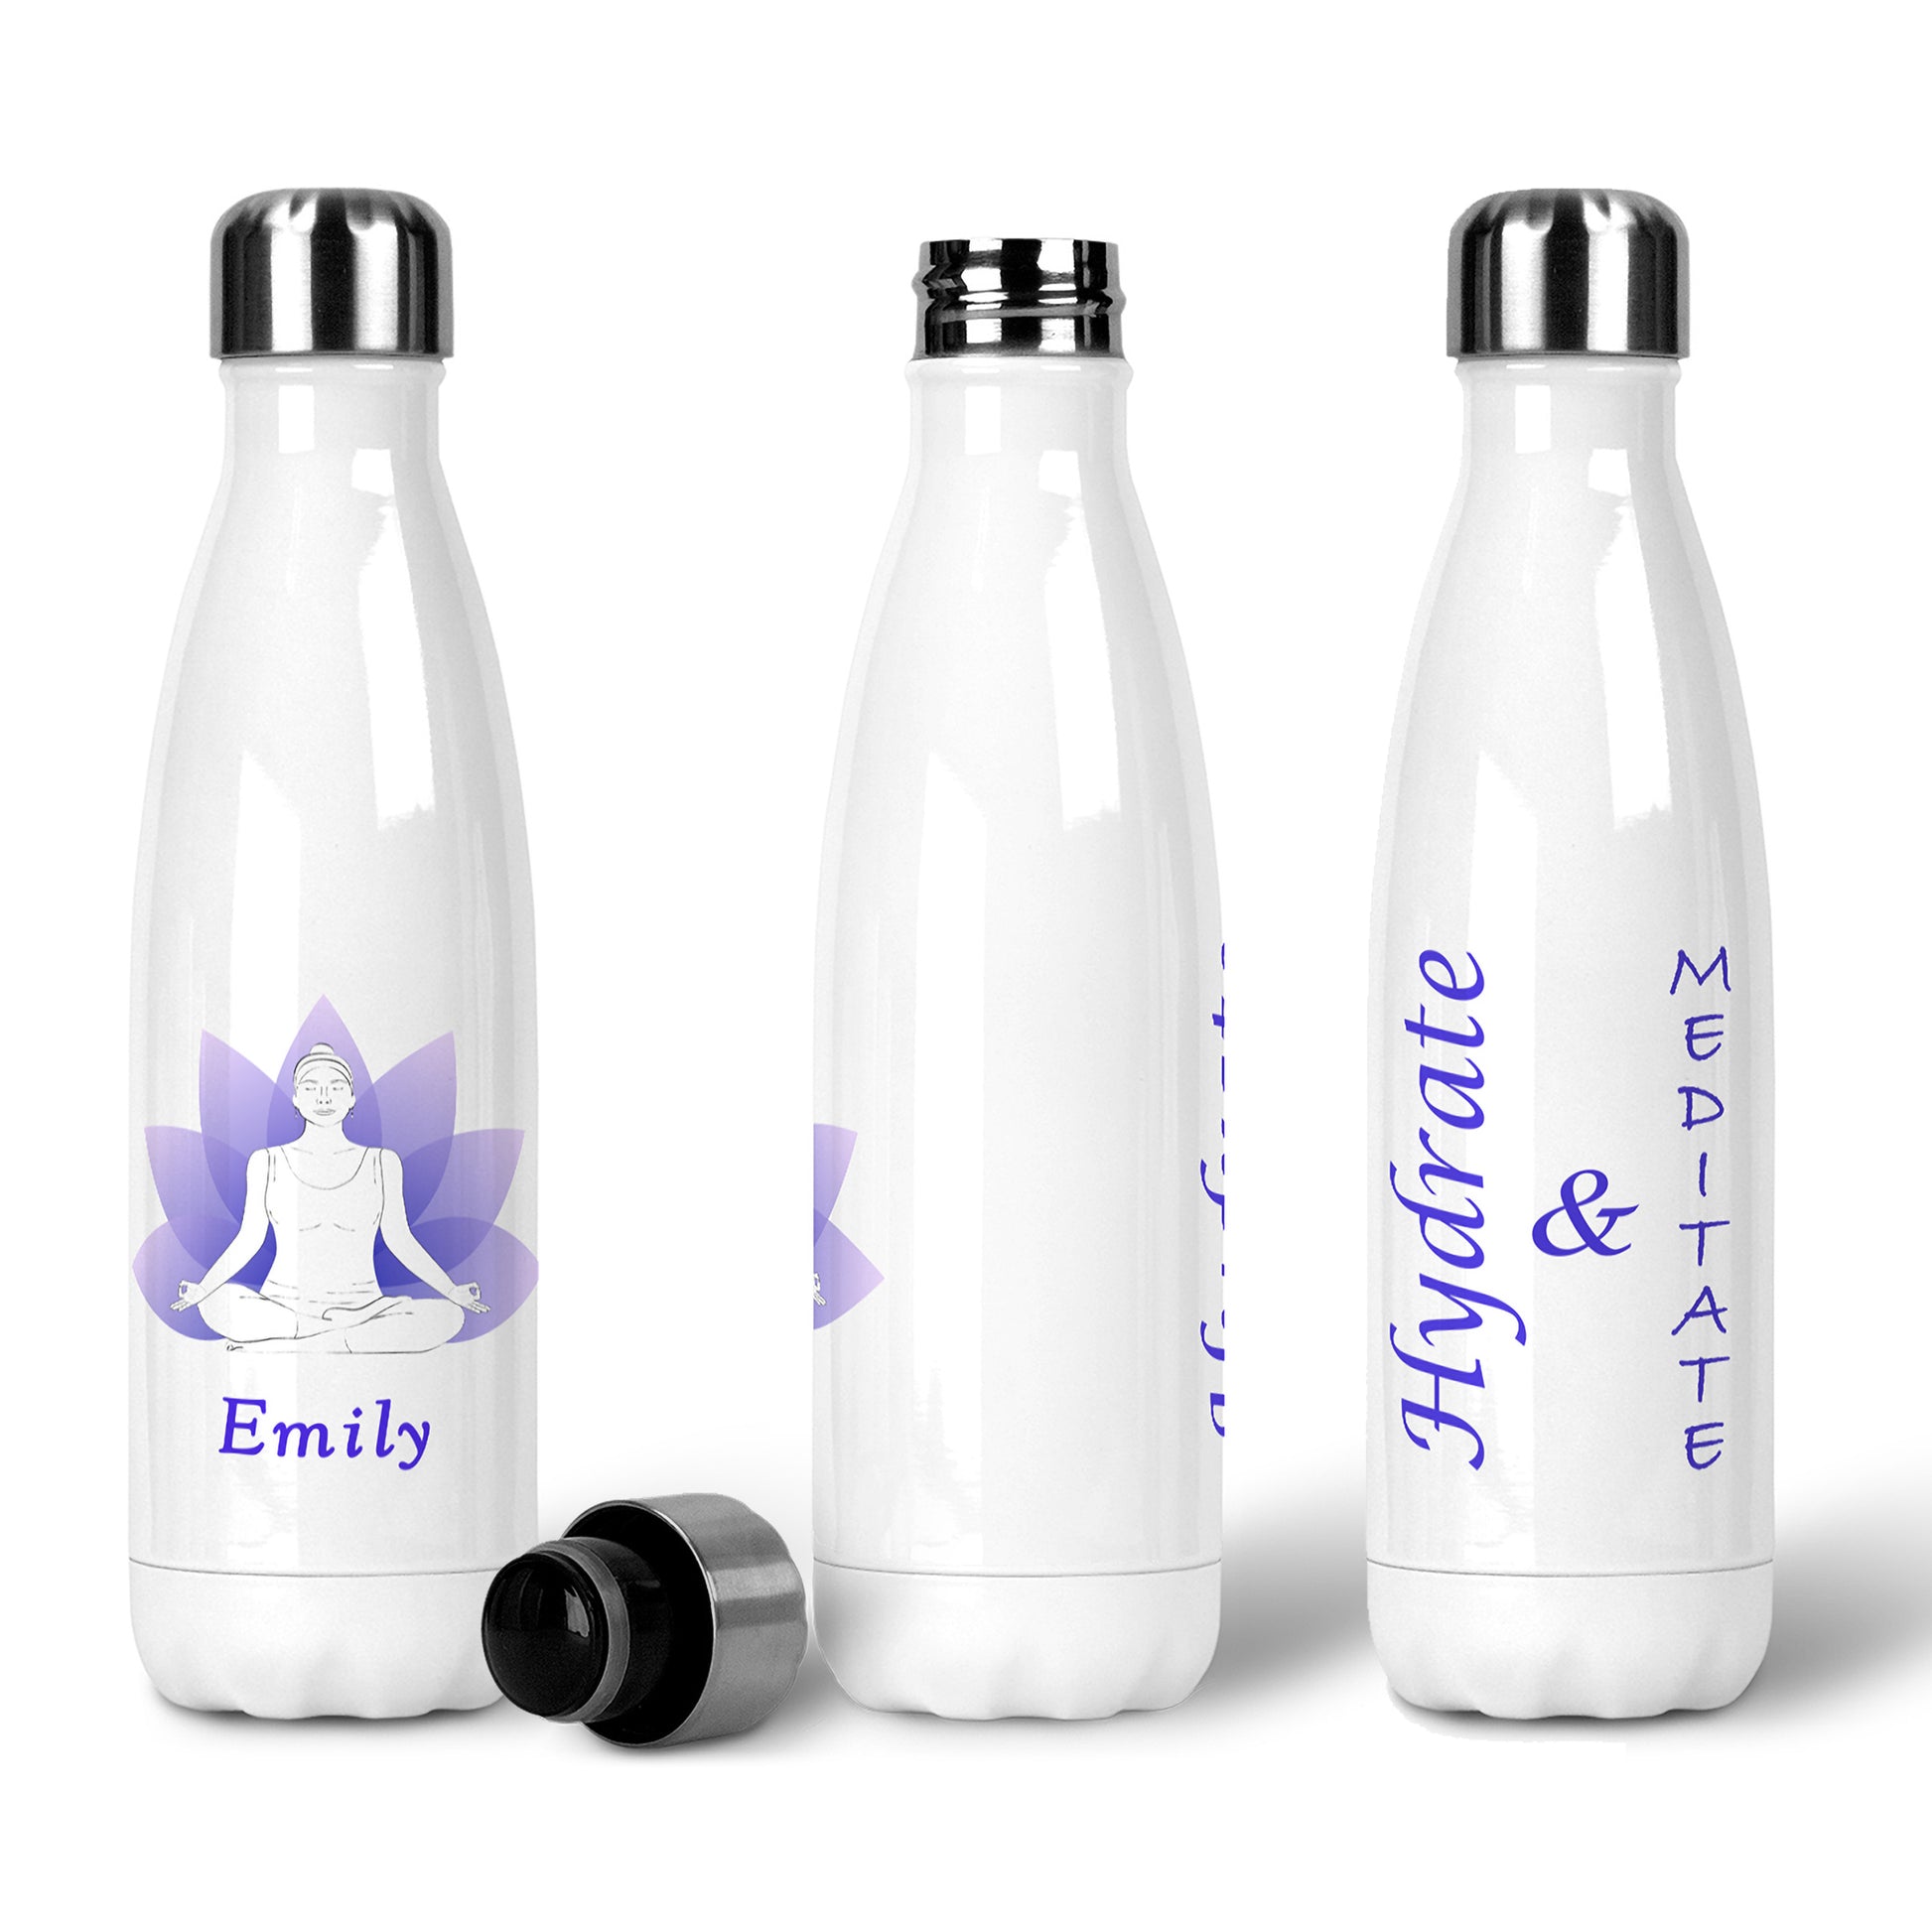 Personalised White 500ml reusable metal water bottle silver lid "Hydrate & Meditate" in violet  purple font on one side. Two-tone light to dark purple lotus flower. Other side   - White outline woman in yoga meditation pose. Personalised name below